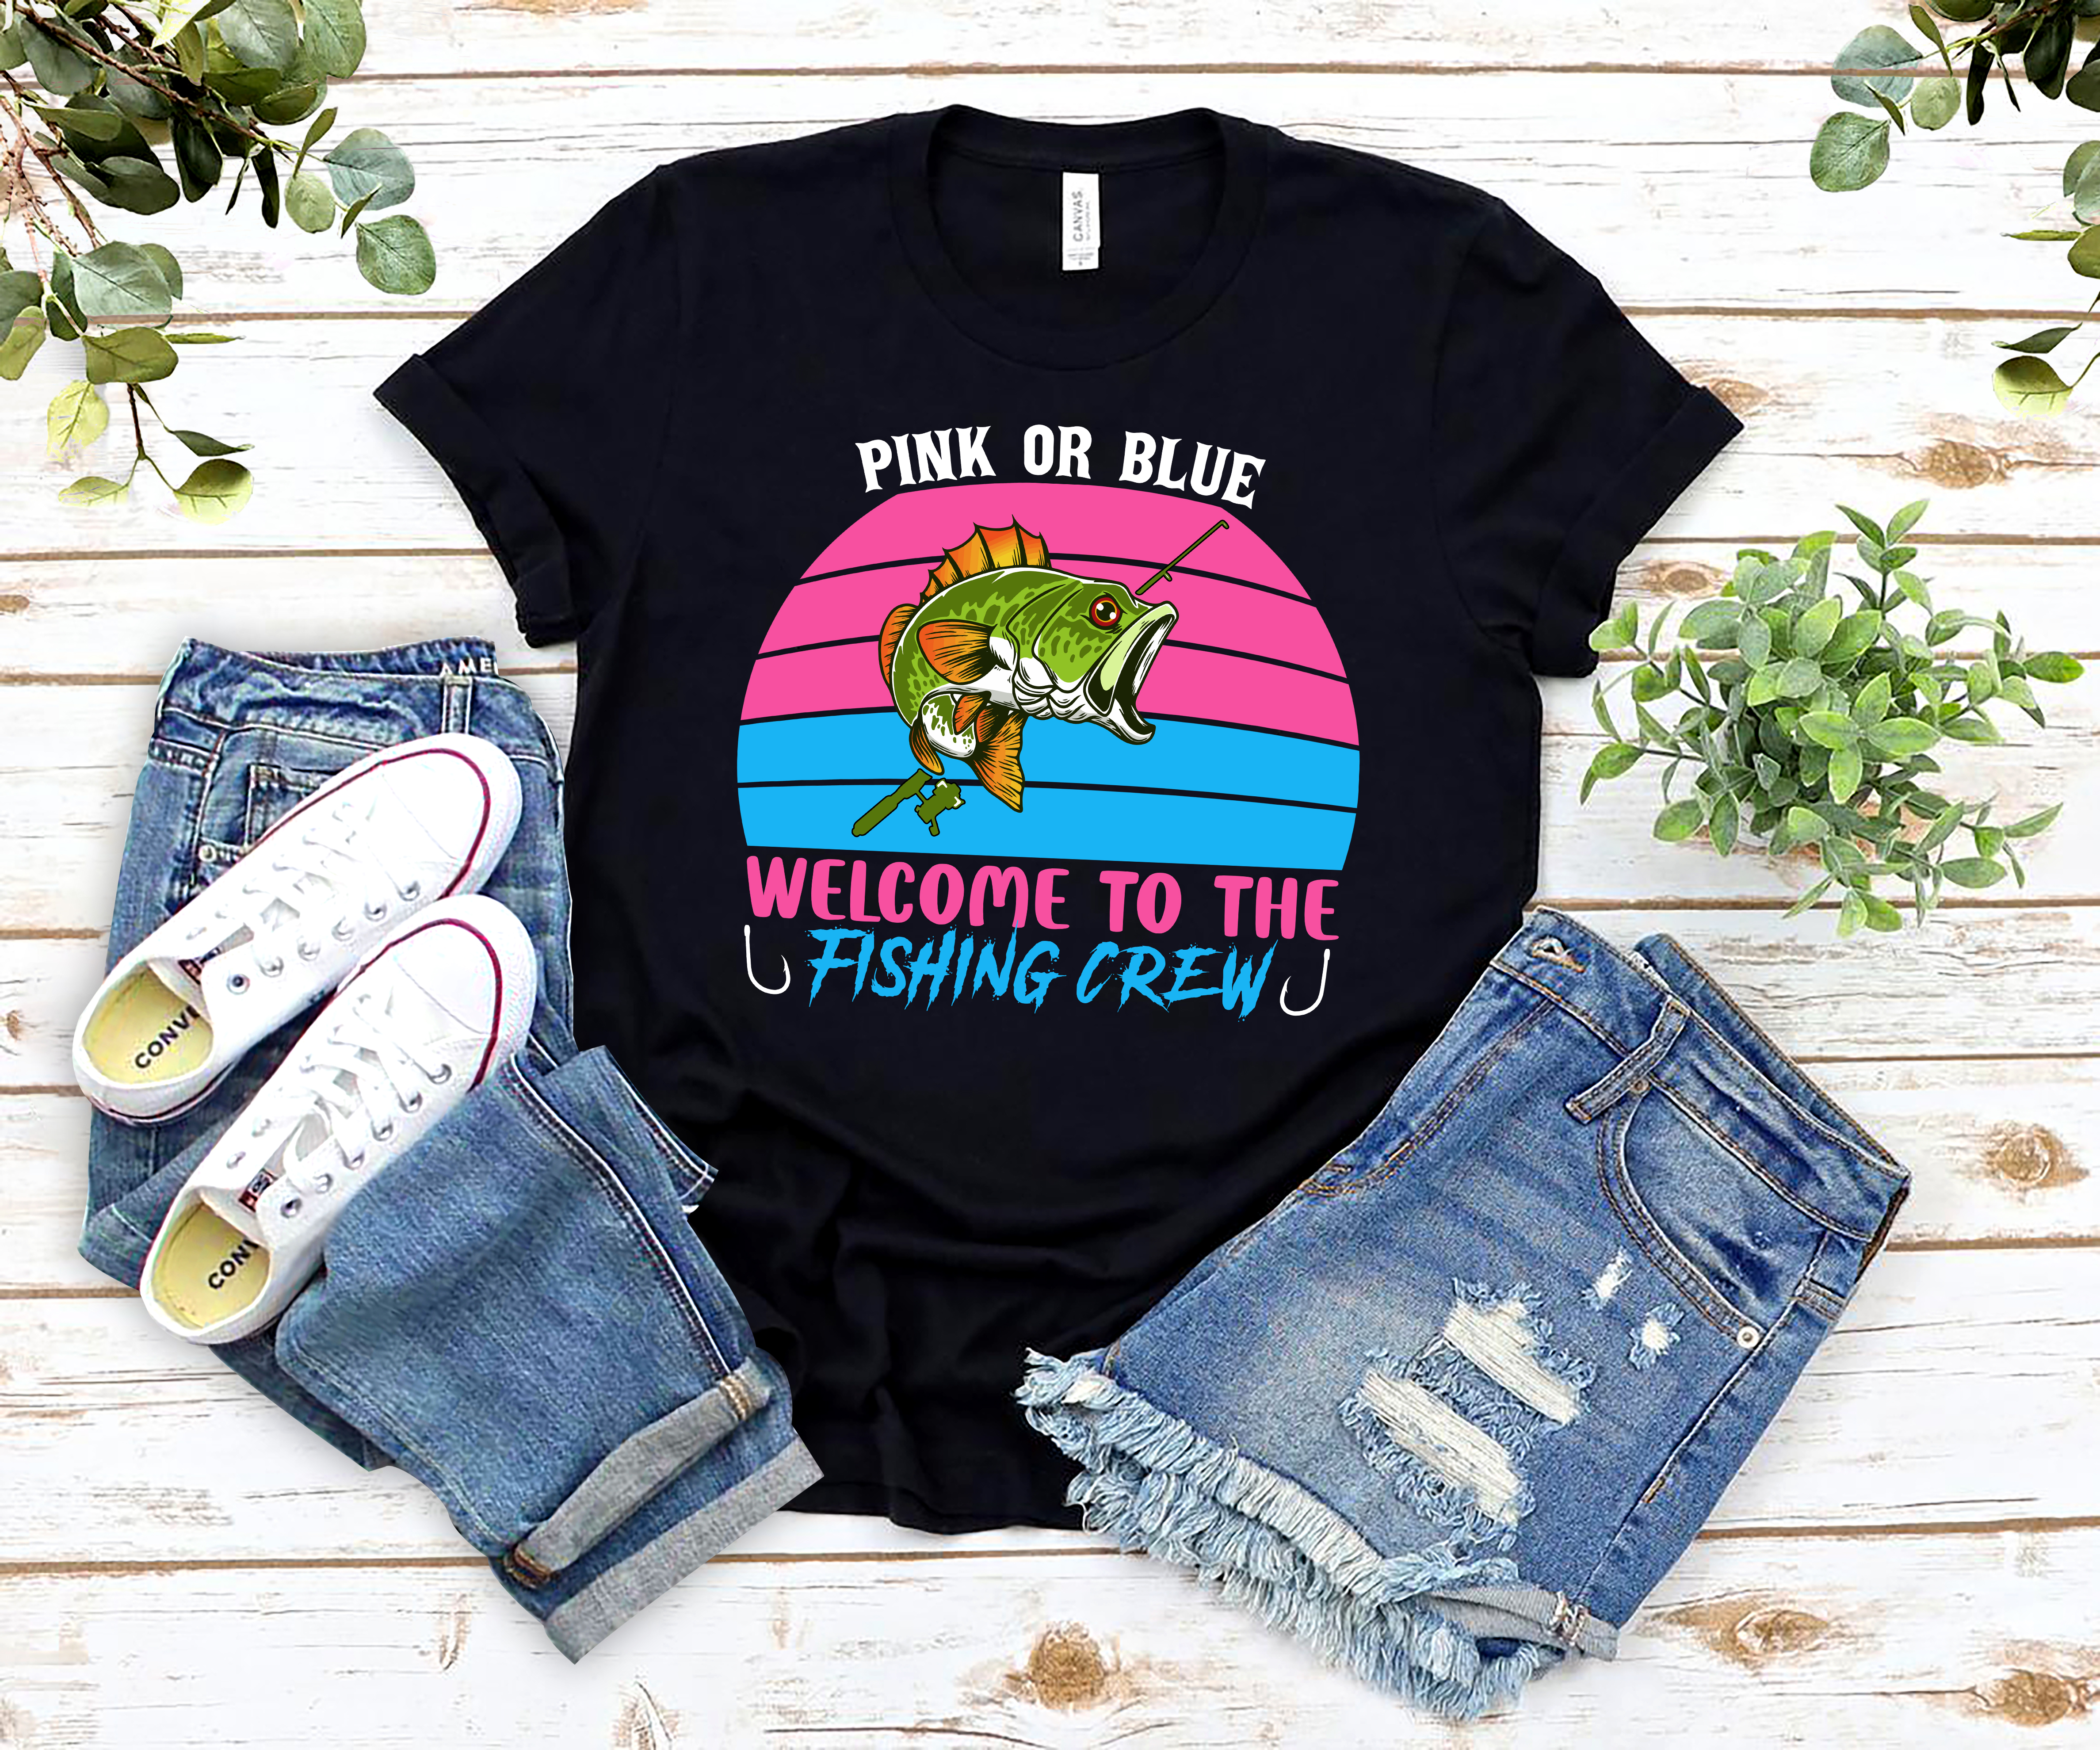 RD Pink Or Blue Welcome To The Fishing Crew Funny Gender Reveal T-Shirt -  Buy t-shirt designs